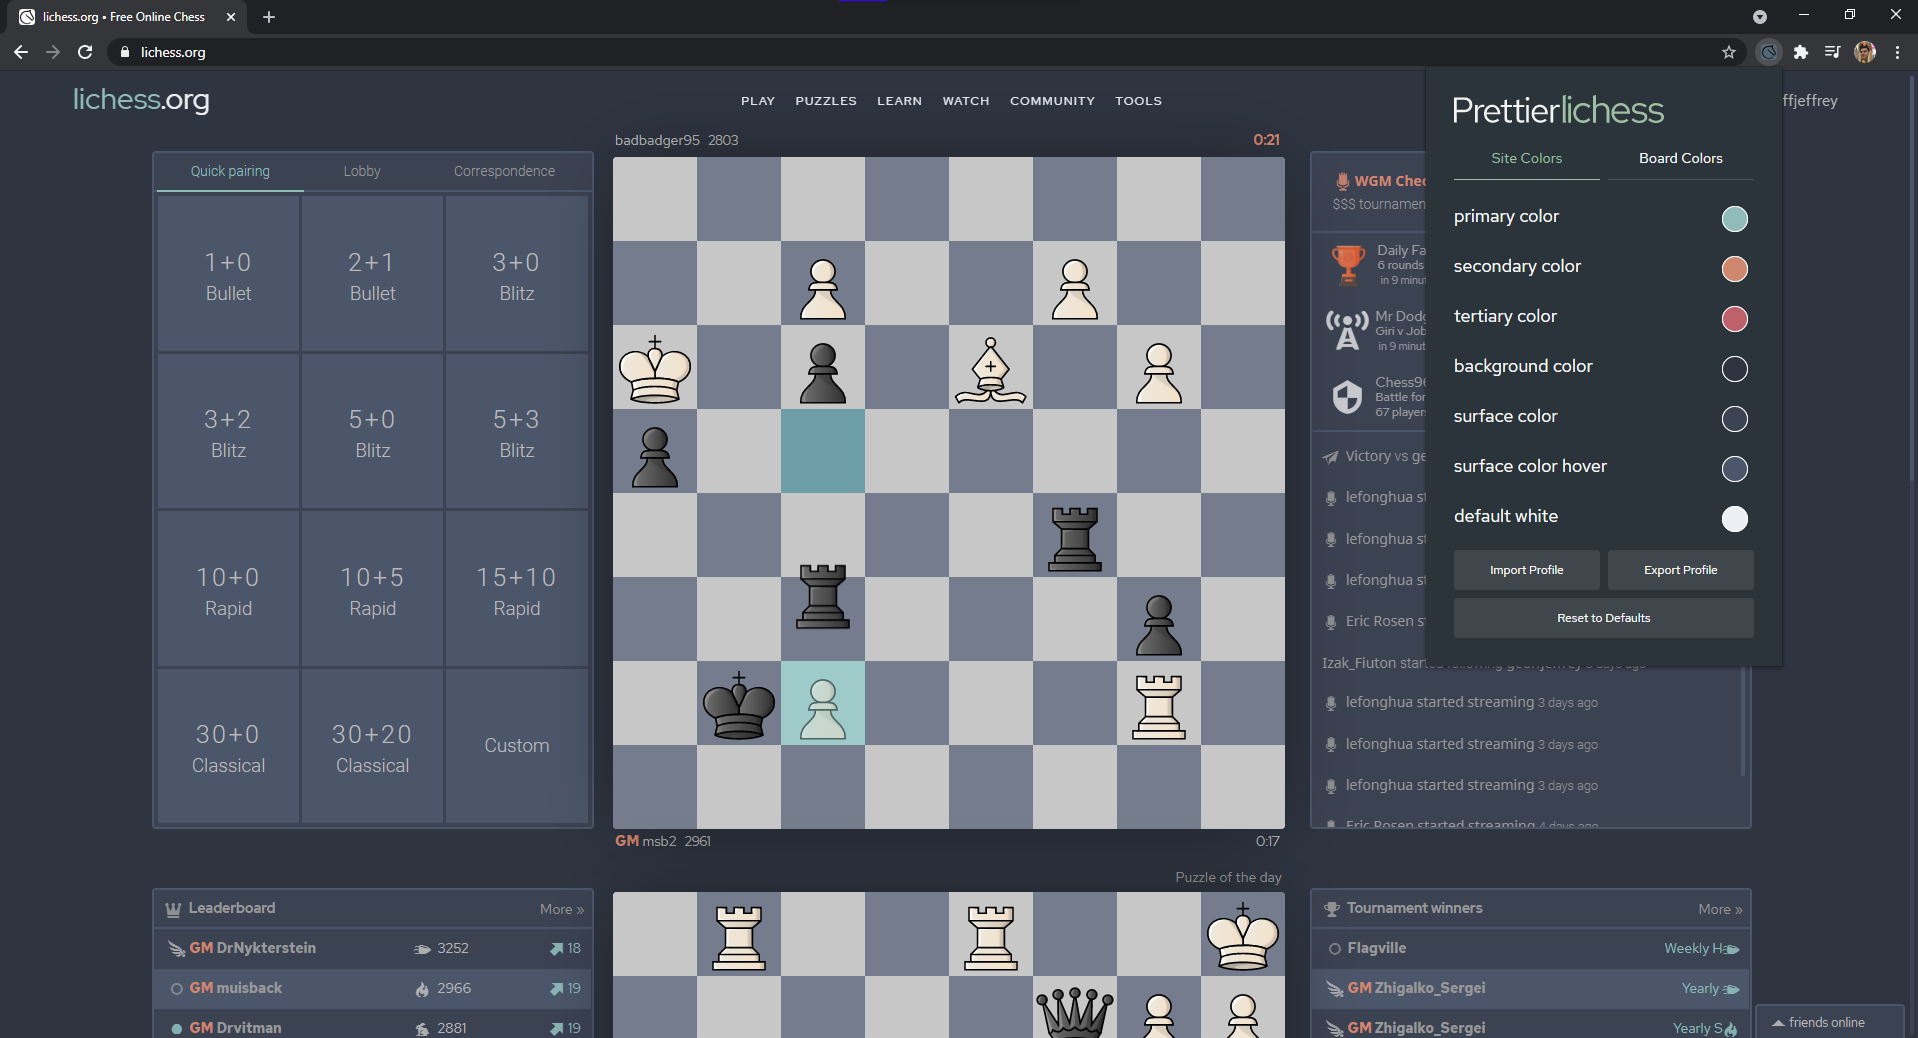 The LiChess Tools browser extension turbocharges lichess!